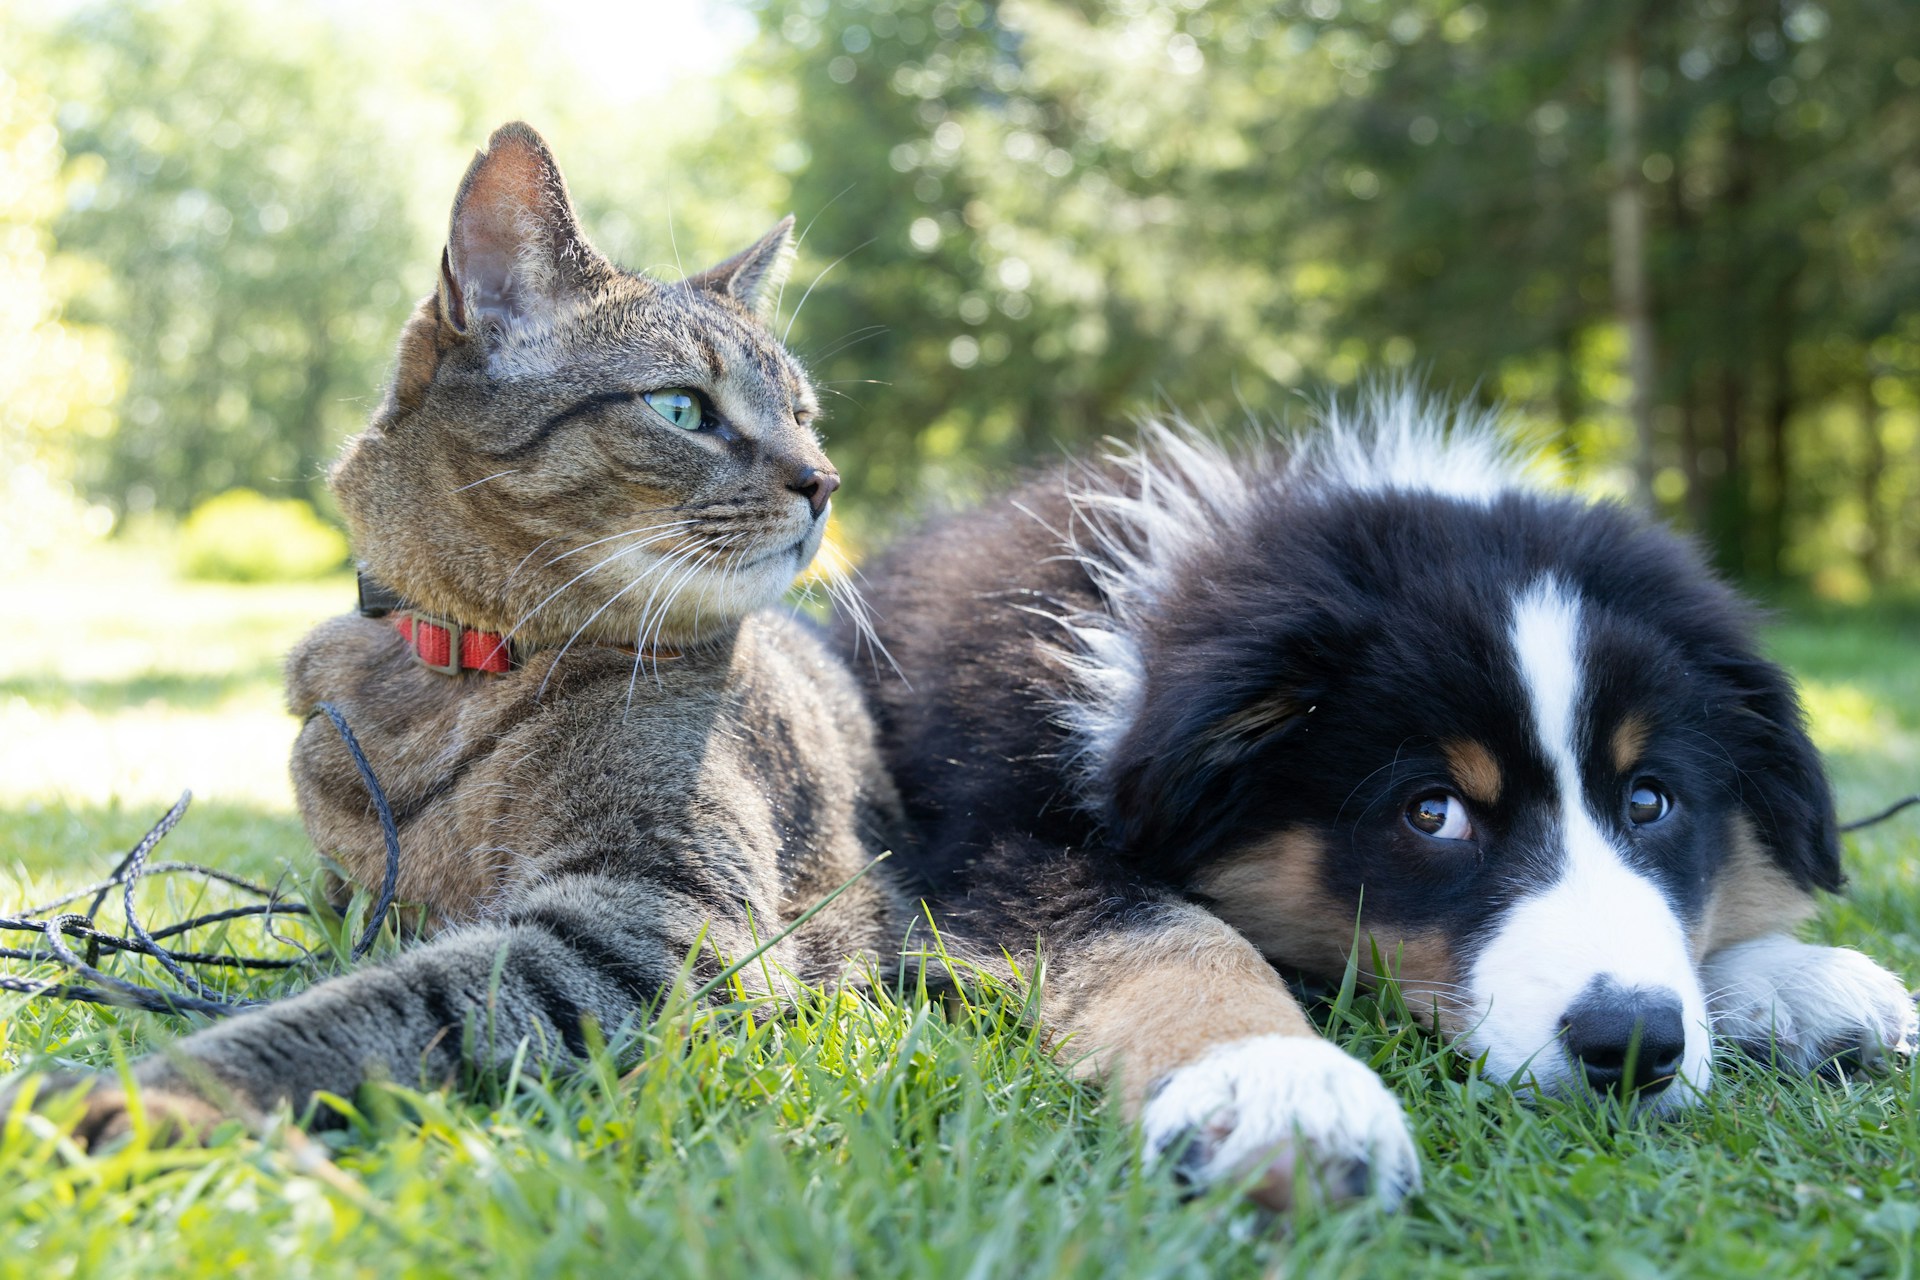 dog and cat sitting next to each other in grass